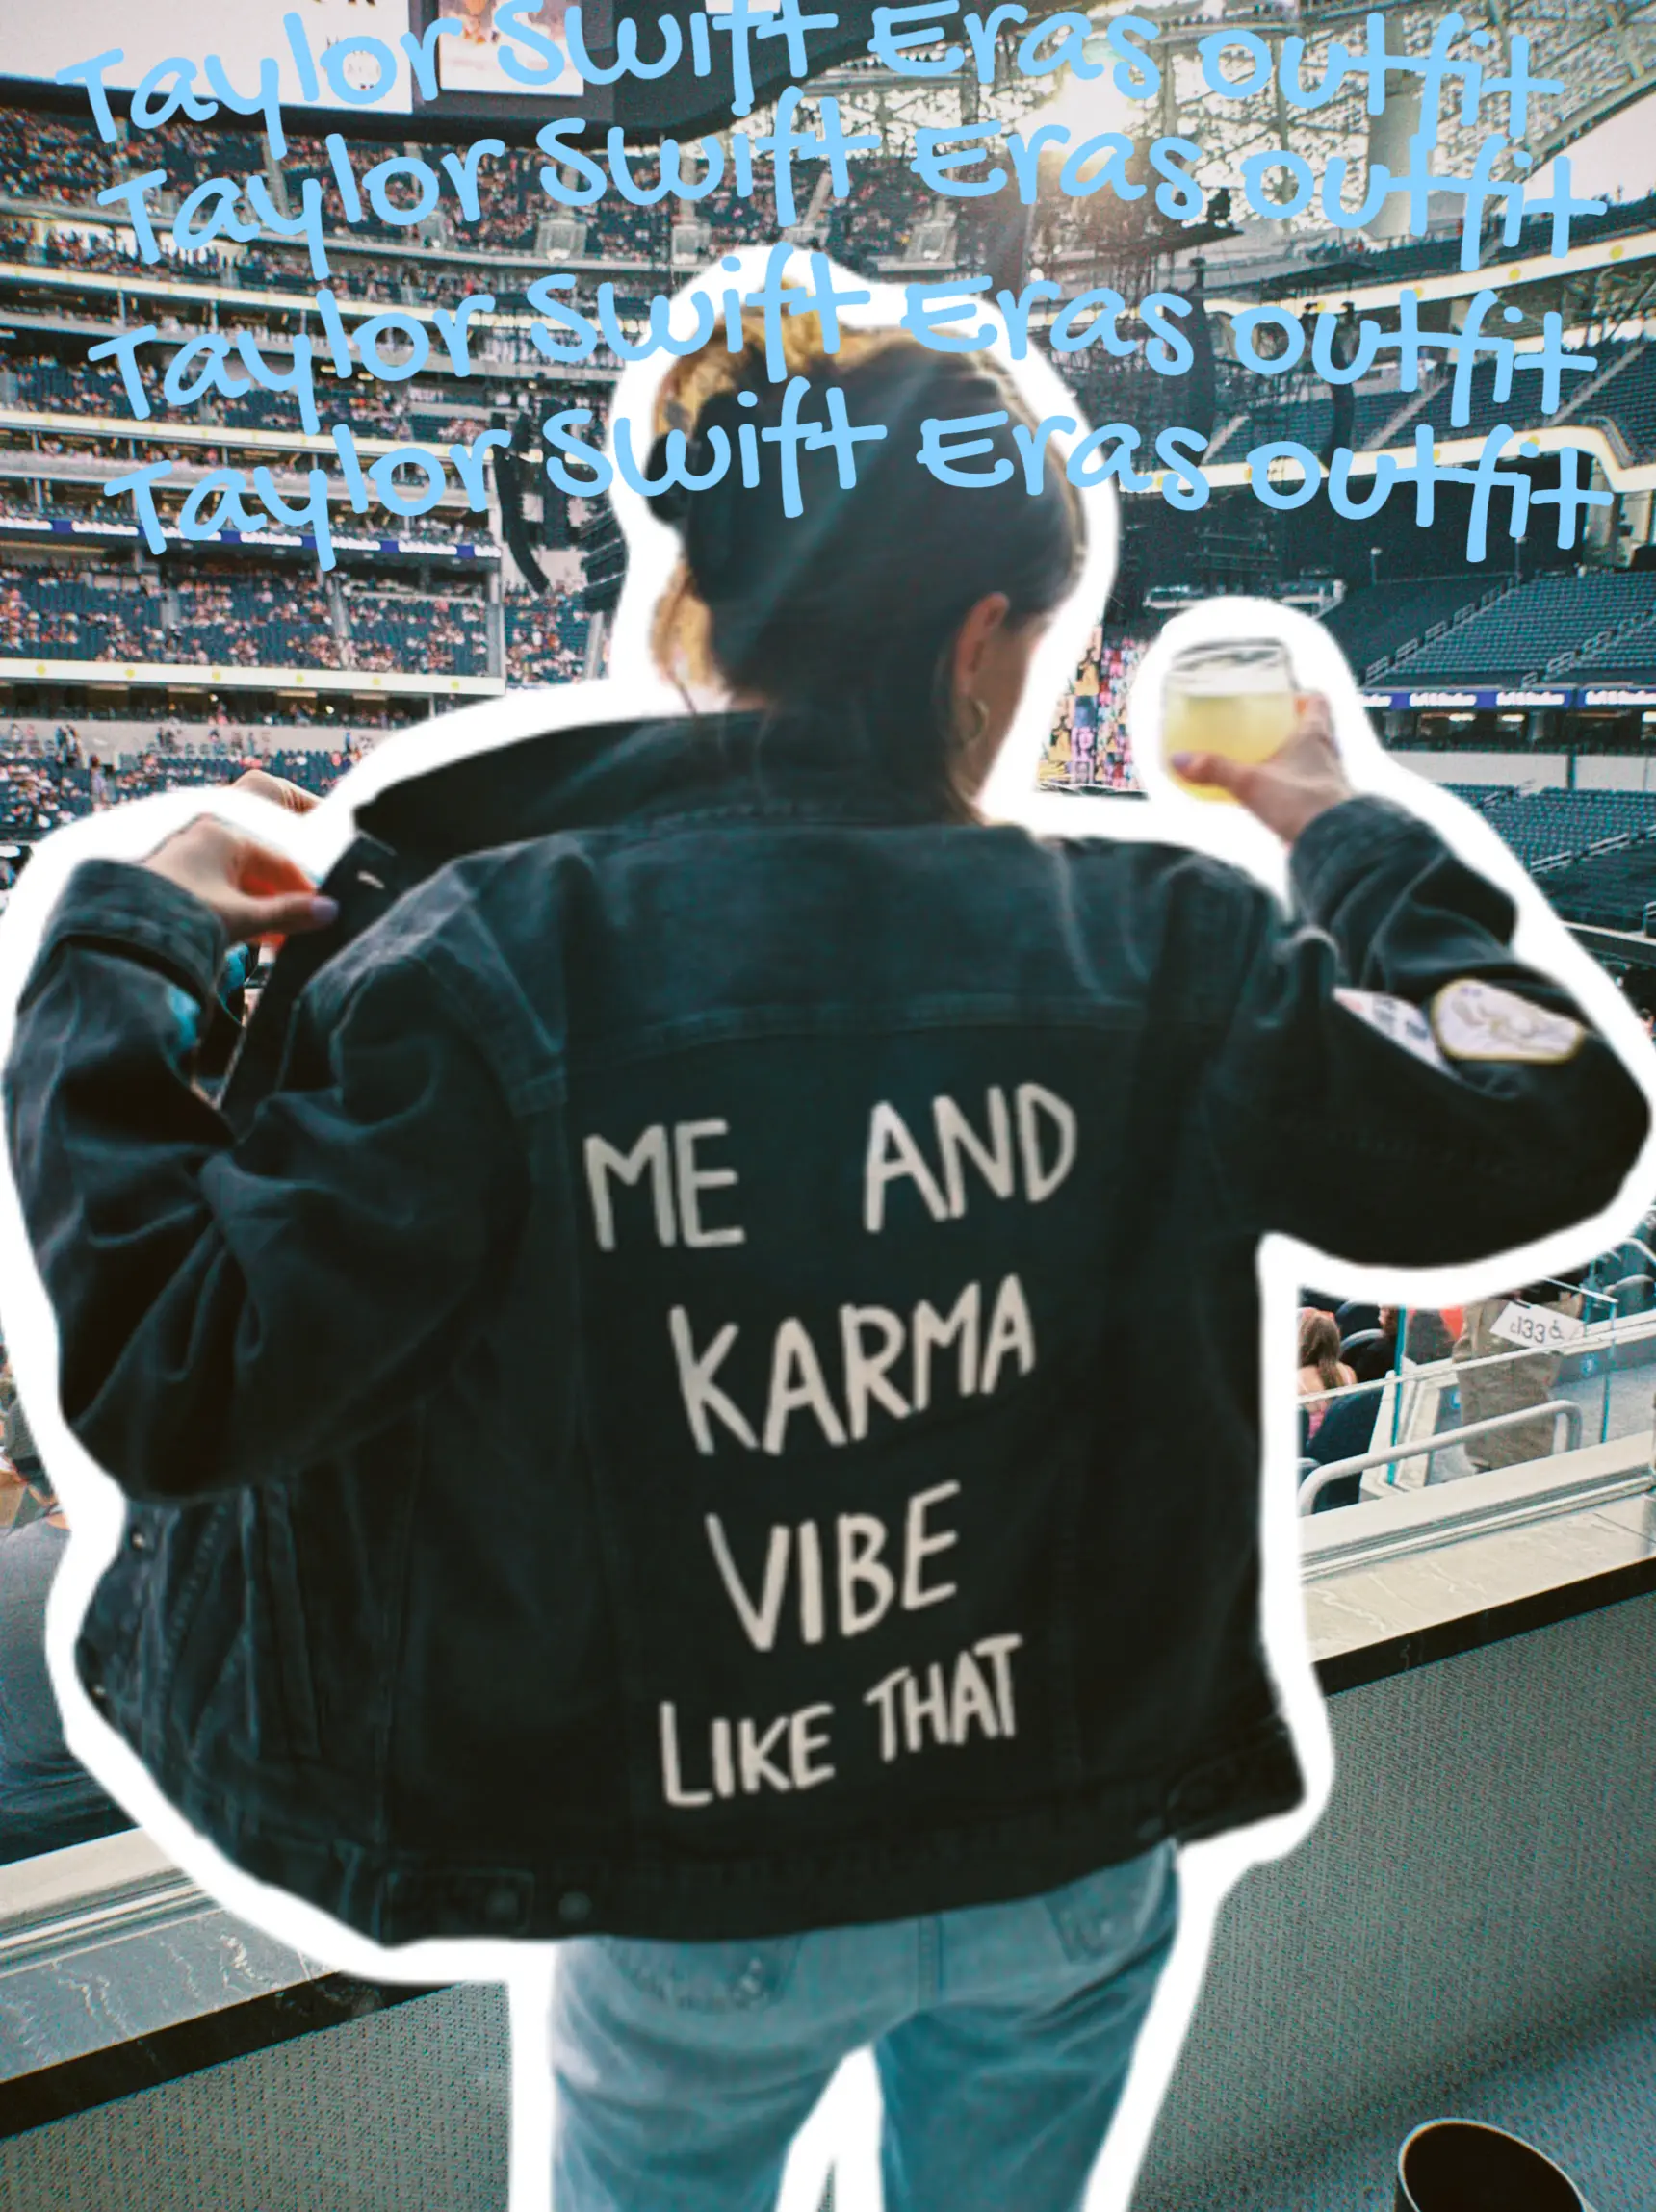 Made my own Rep jacket from official patches from the Taylor Swift